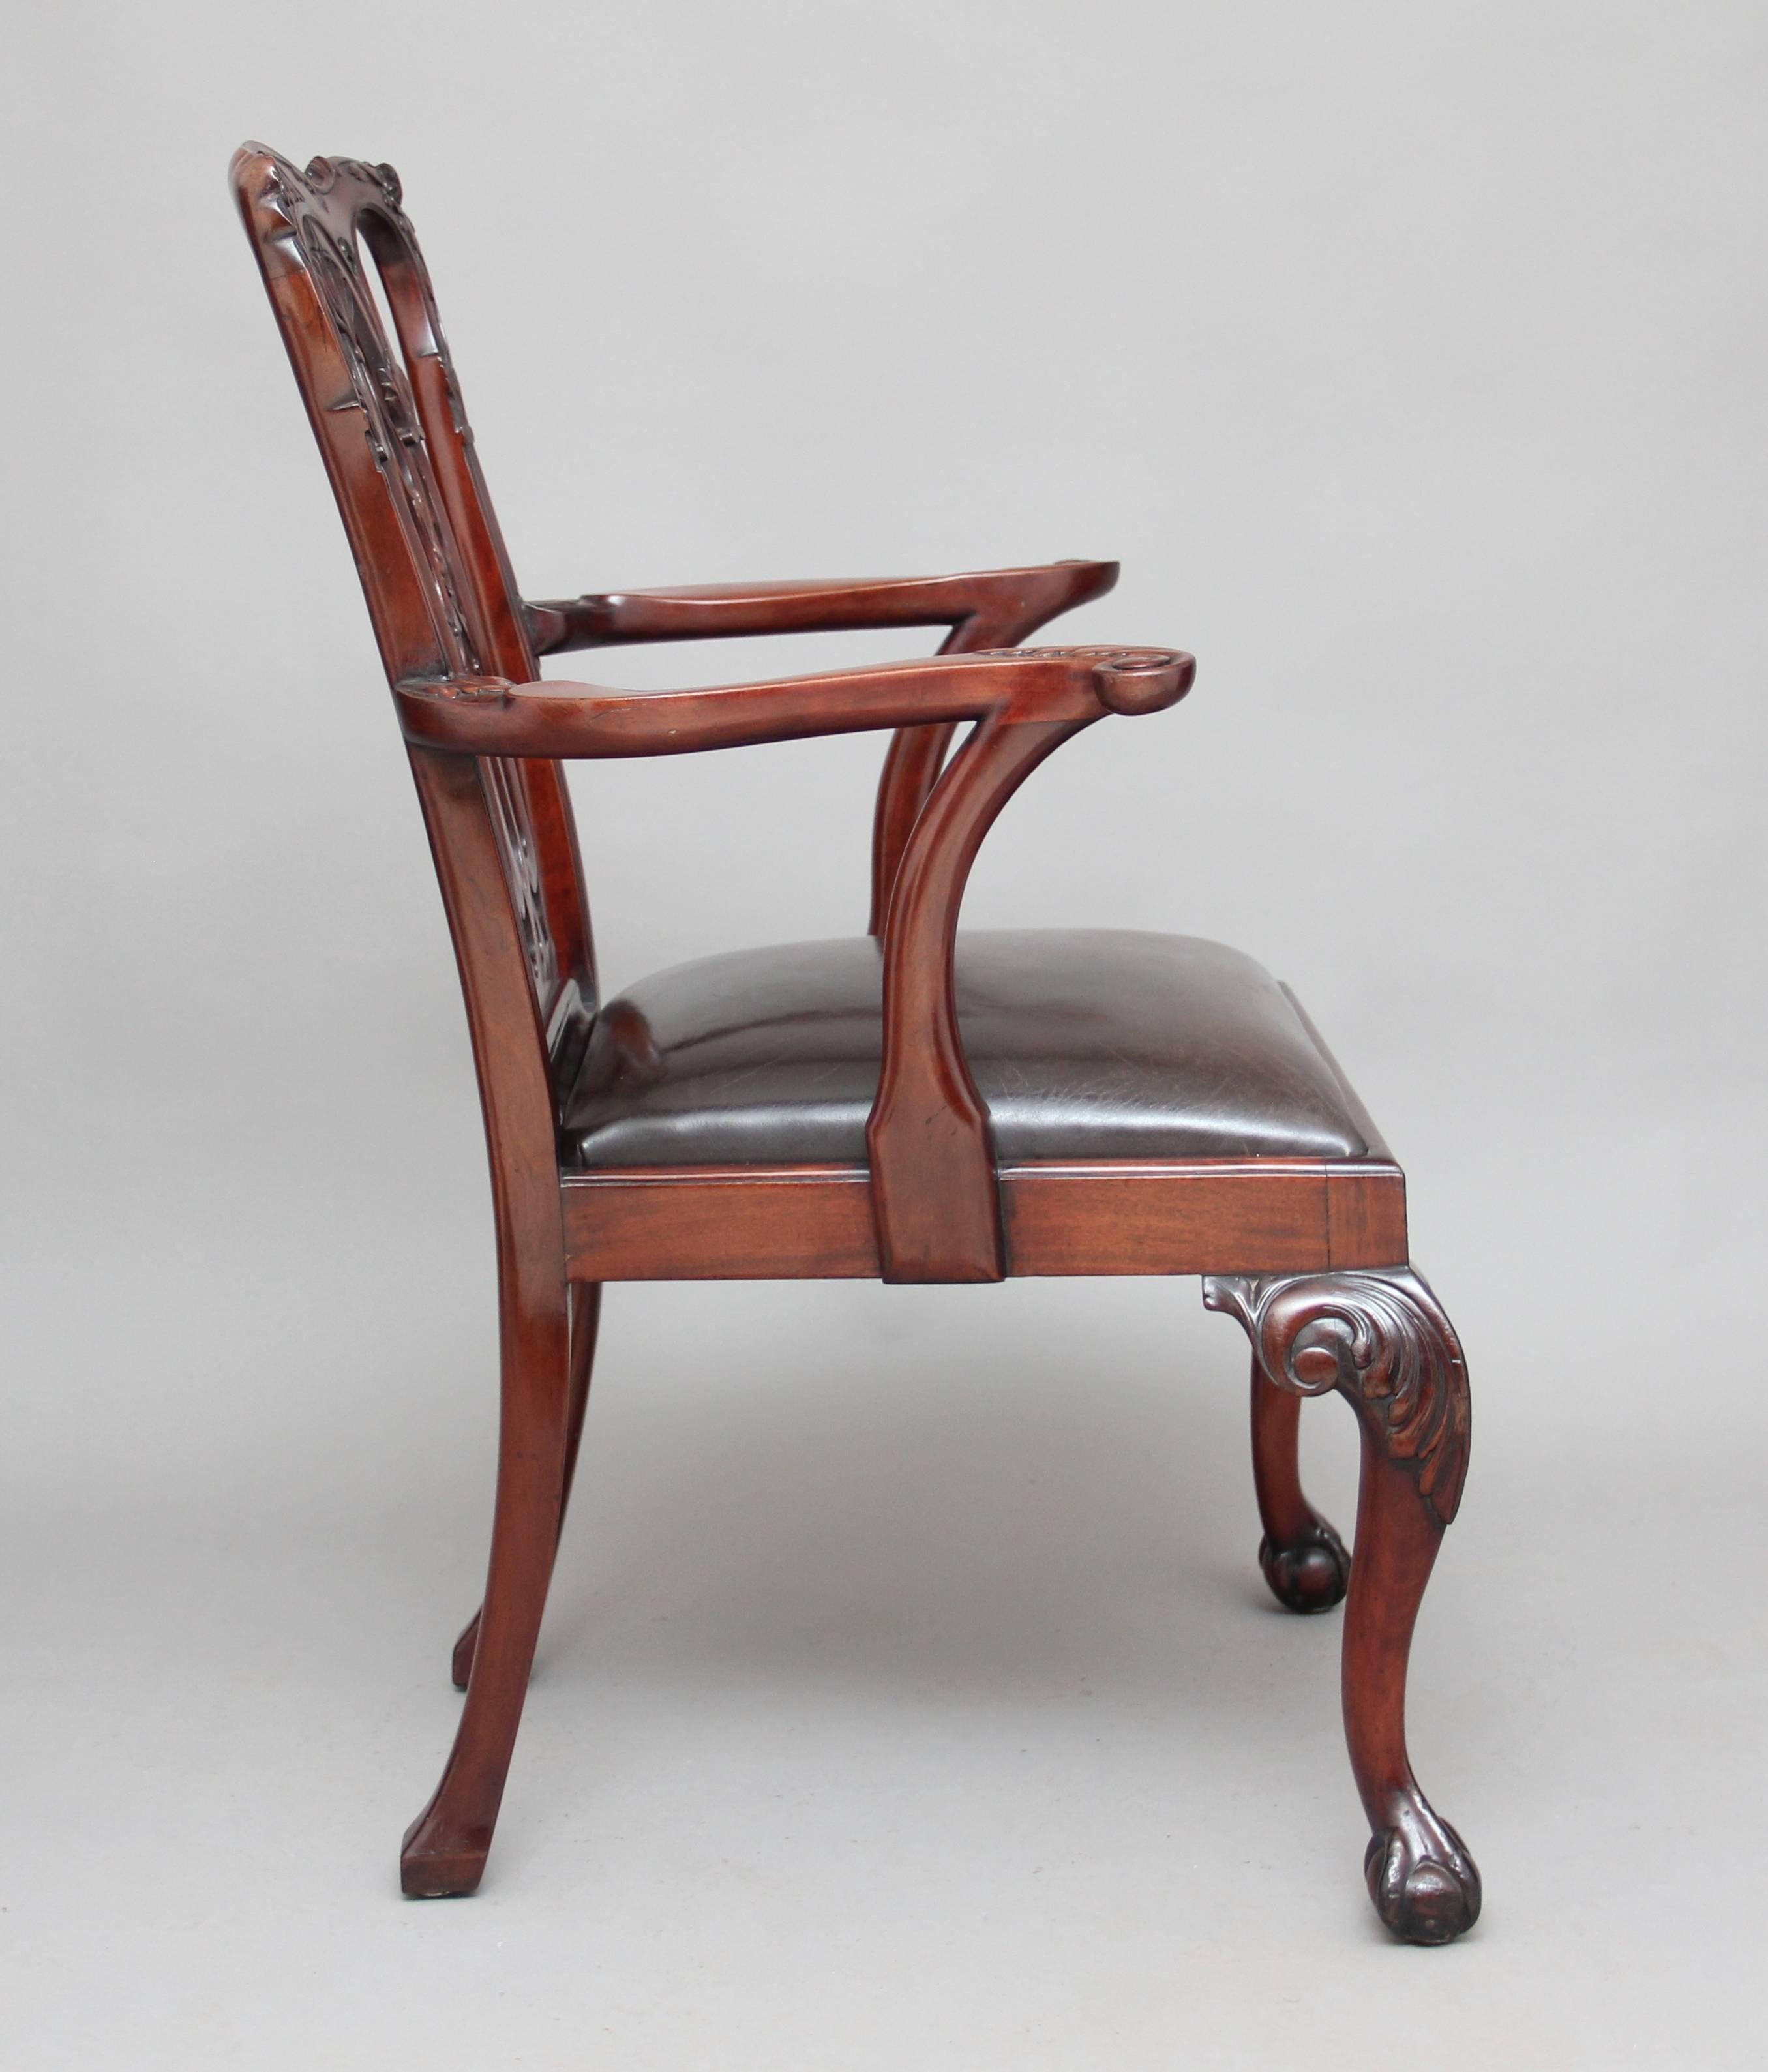 19th century mahogany armchair in the Chippendale style, with a carved and pierced splat in the back, the whole back is also carved as well as the arms, the front cabriole legs are carved on the knees terminating in a ball and claw foot, with a drop